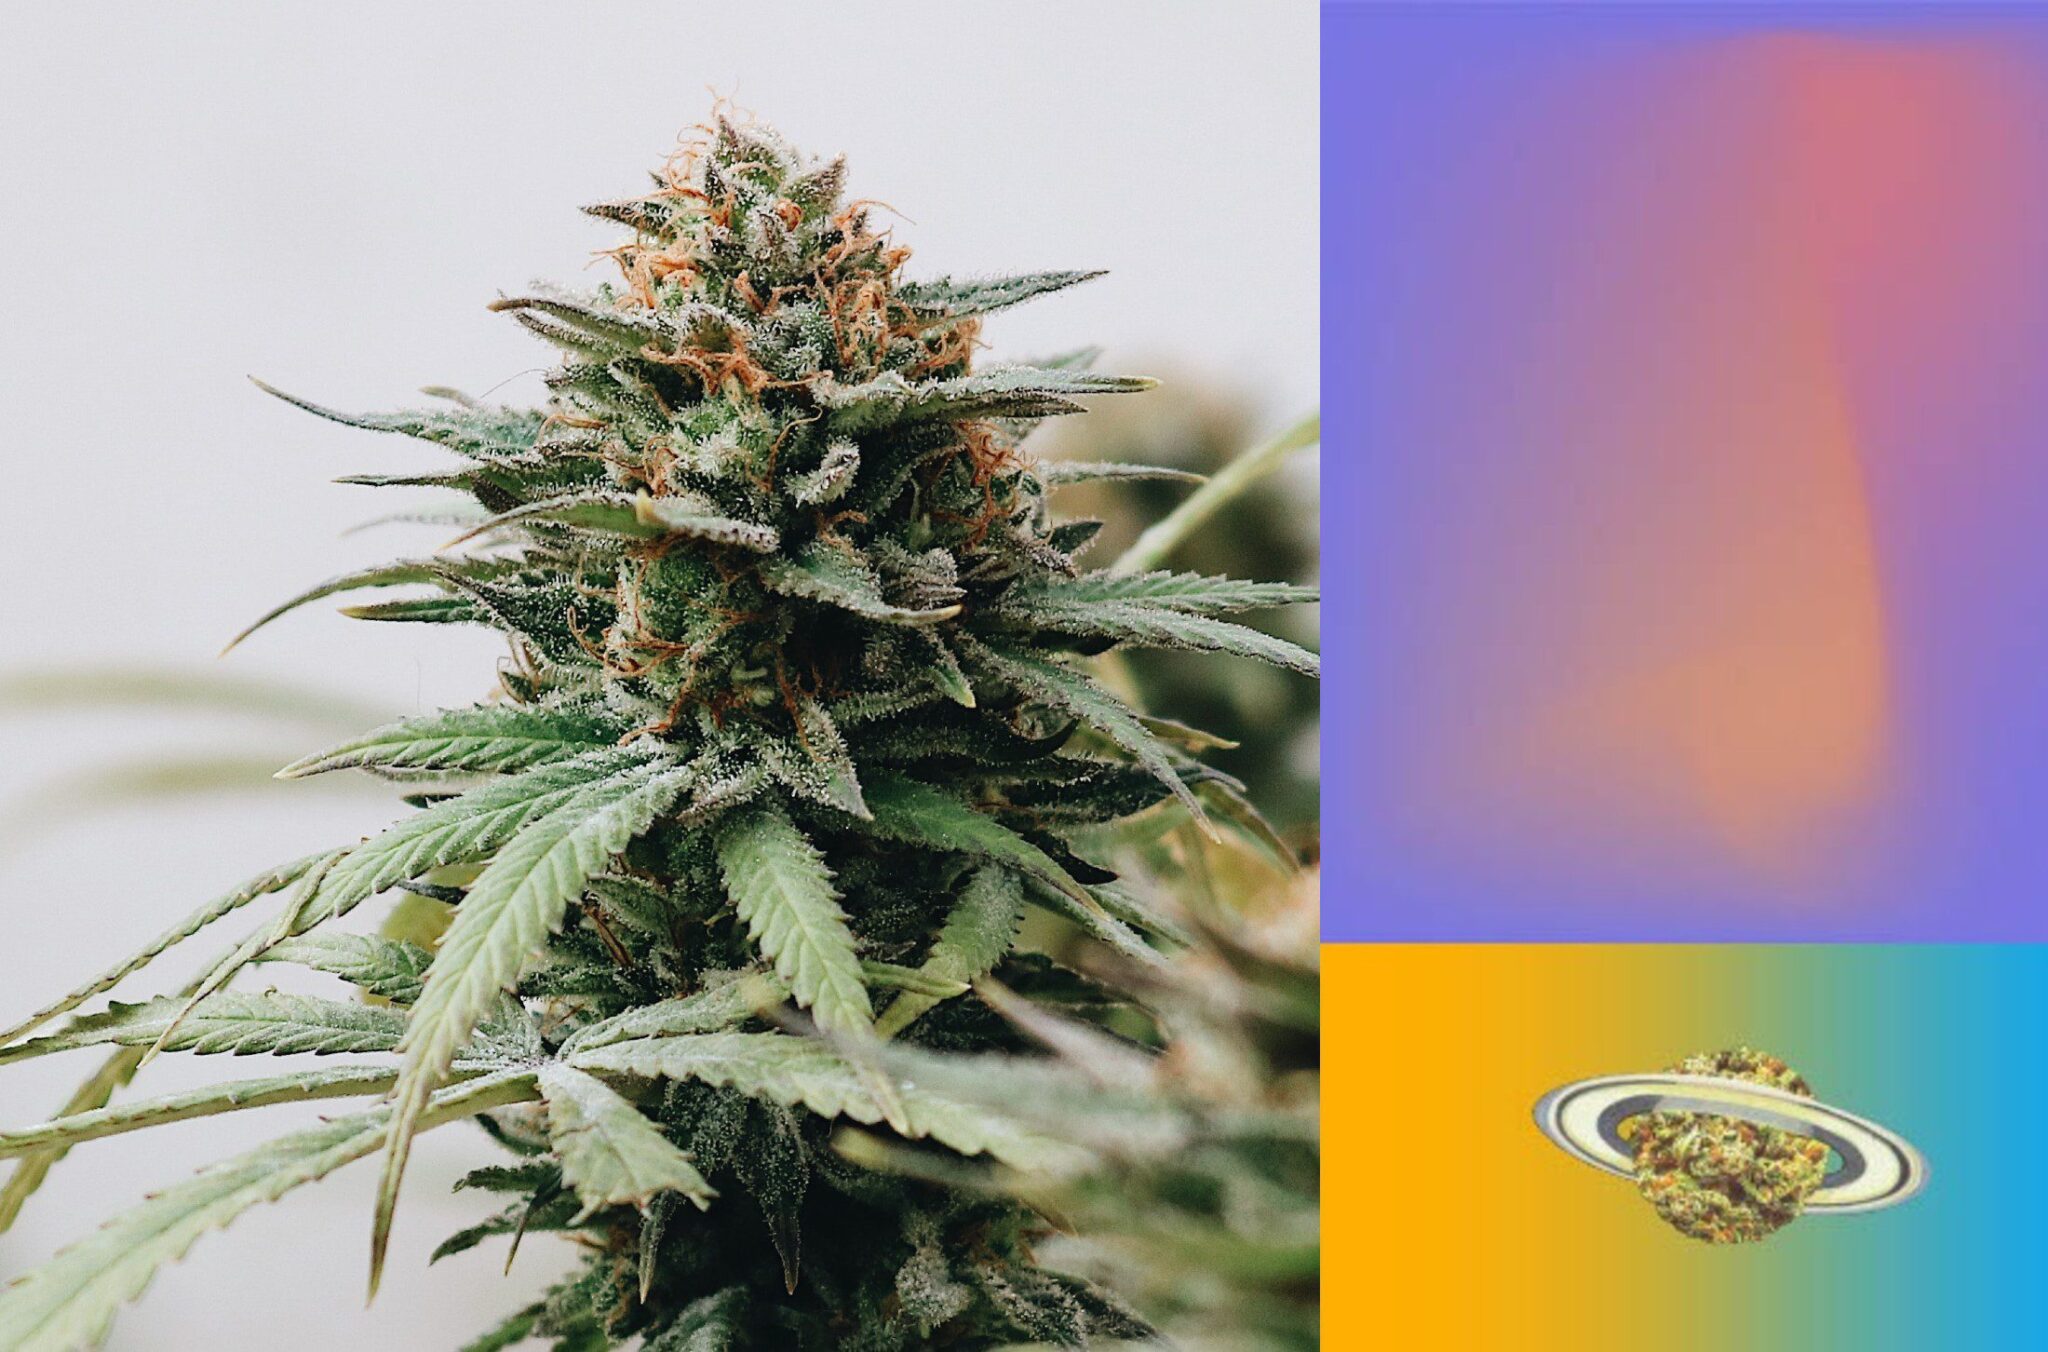 Emjay's Cannabis Type Guide. Photo by Franco Zen on Unsplash.